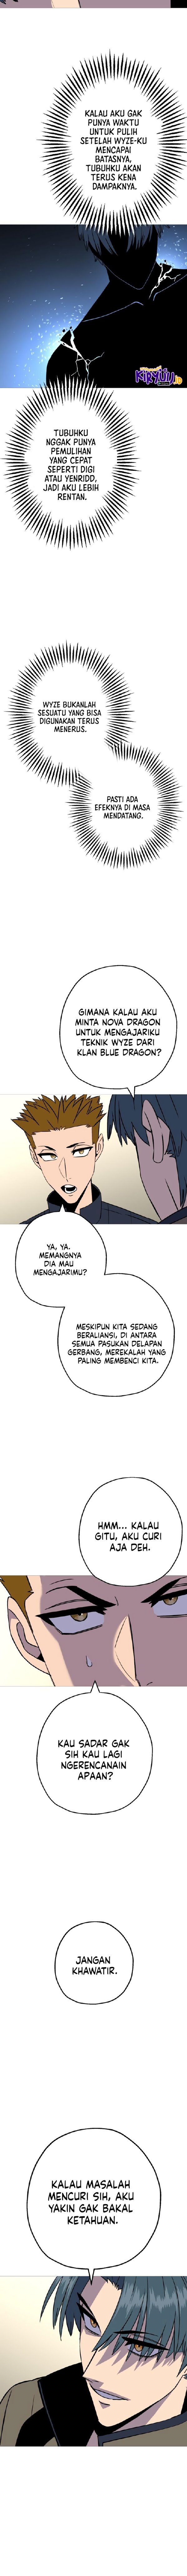 Dilarang COPAS - situs resmi www.mangacanblog.com - Komik the story of a low rank soldier becoming a monarch 107 - chapter 107 108 Indonesia the story of a low rank soldier becoming a monarch 107 - chapter 107 Terbaru 12|Baca Manga Komik Indonesia|Mangacan